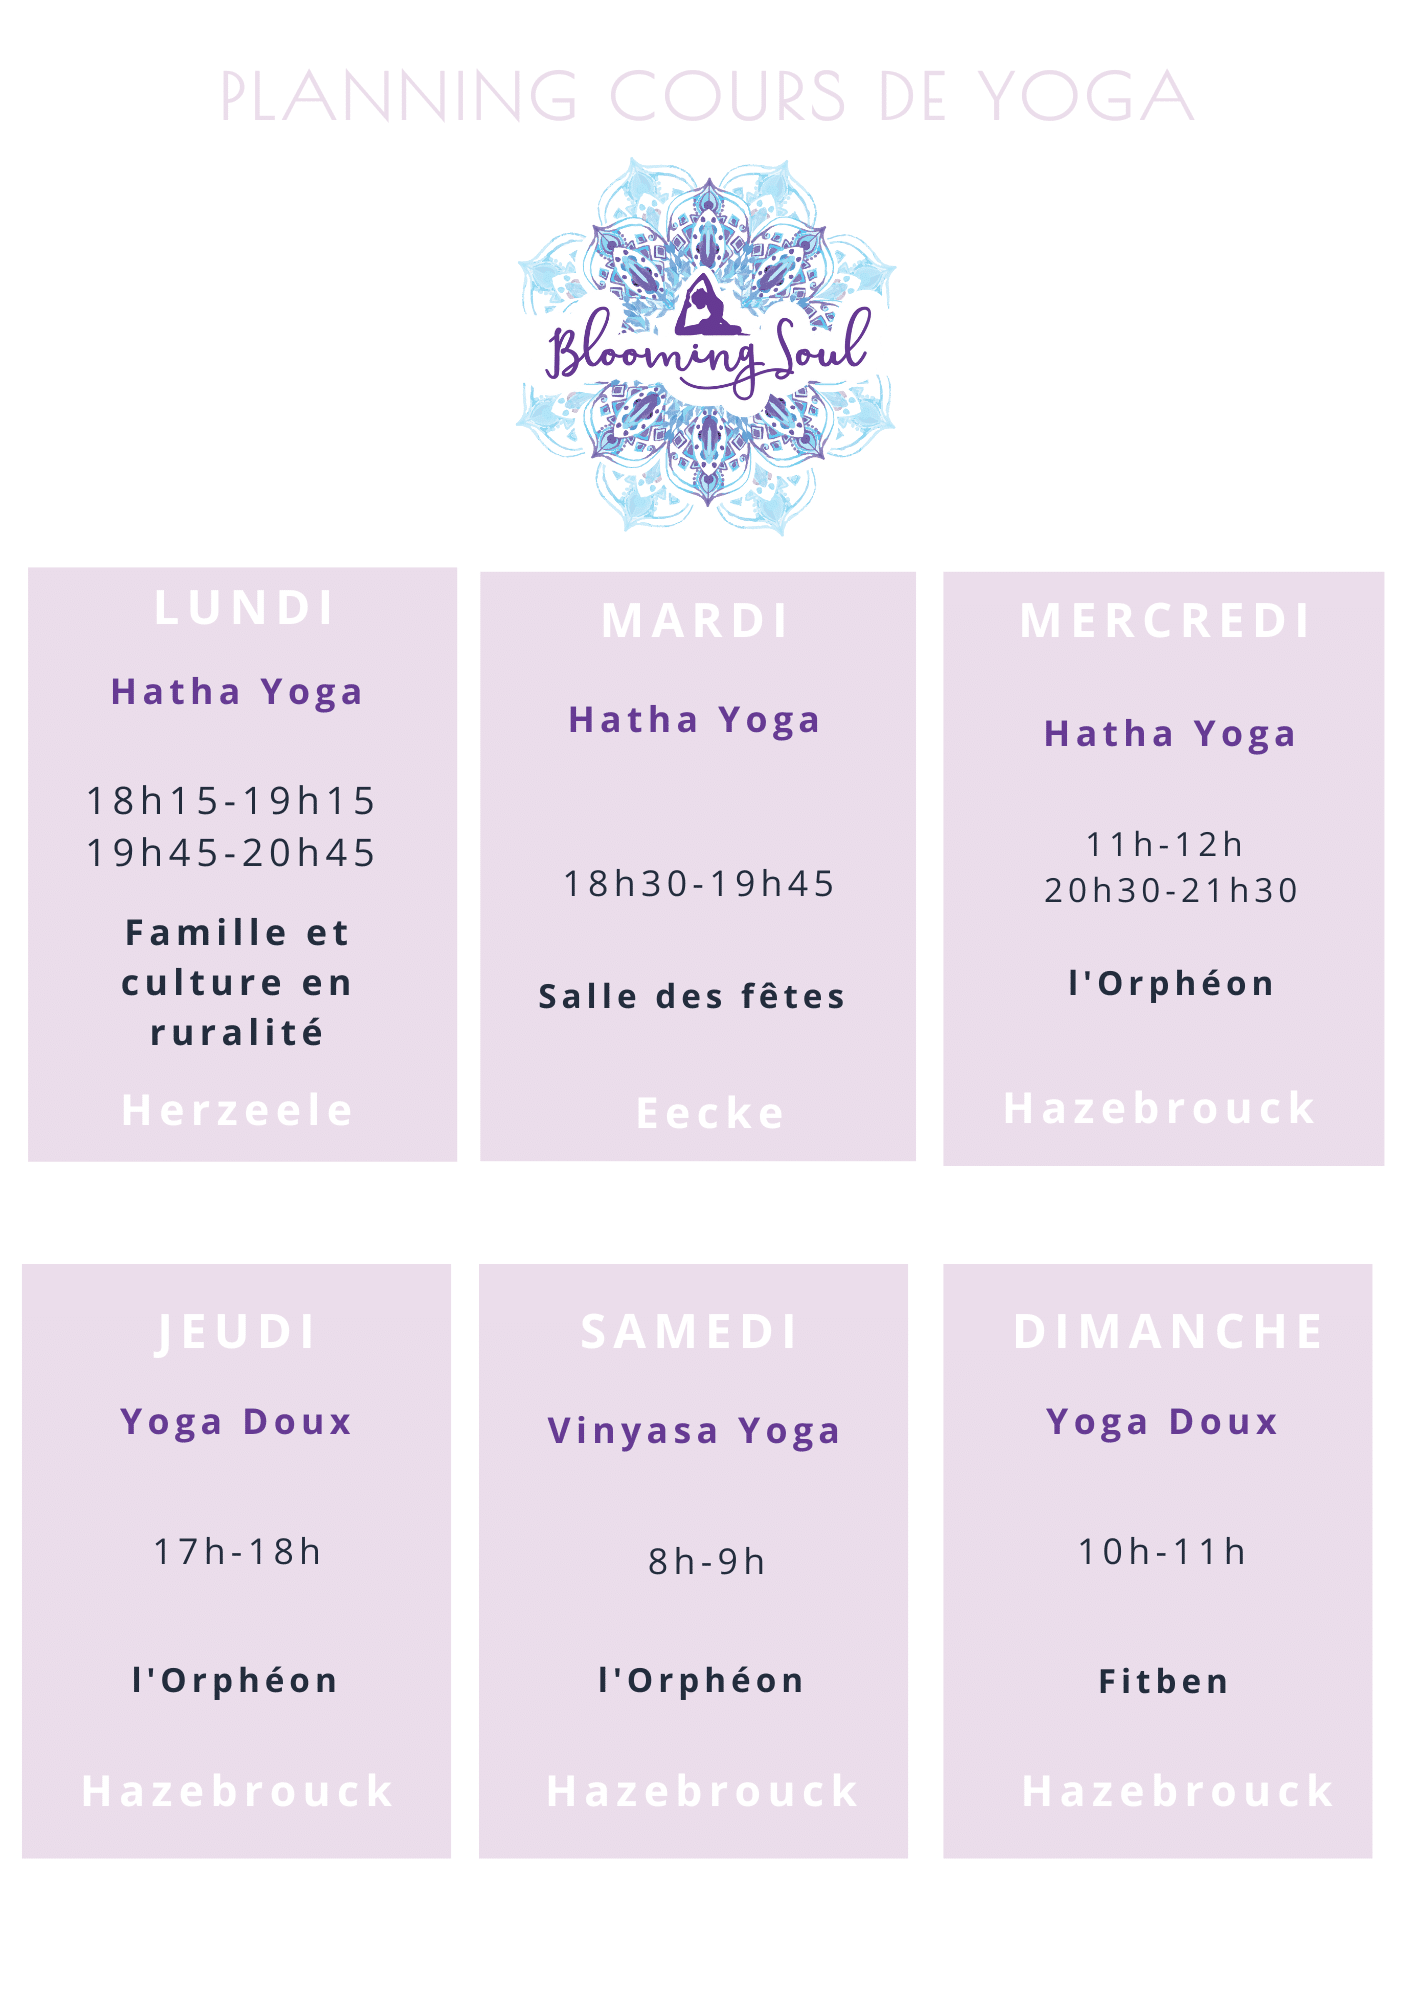 Planning-cours-yoga